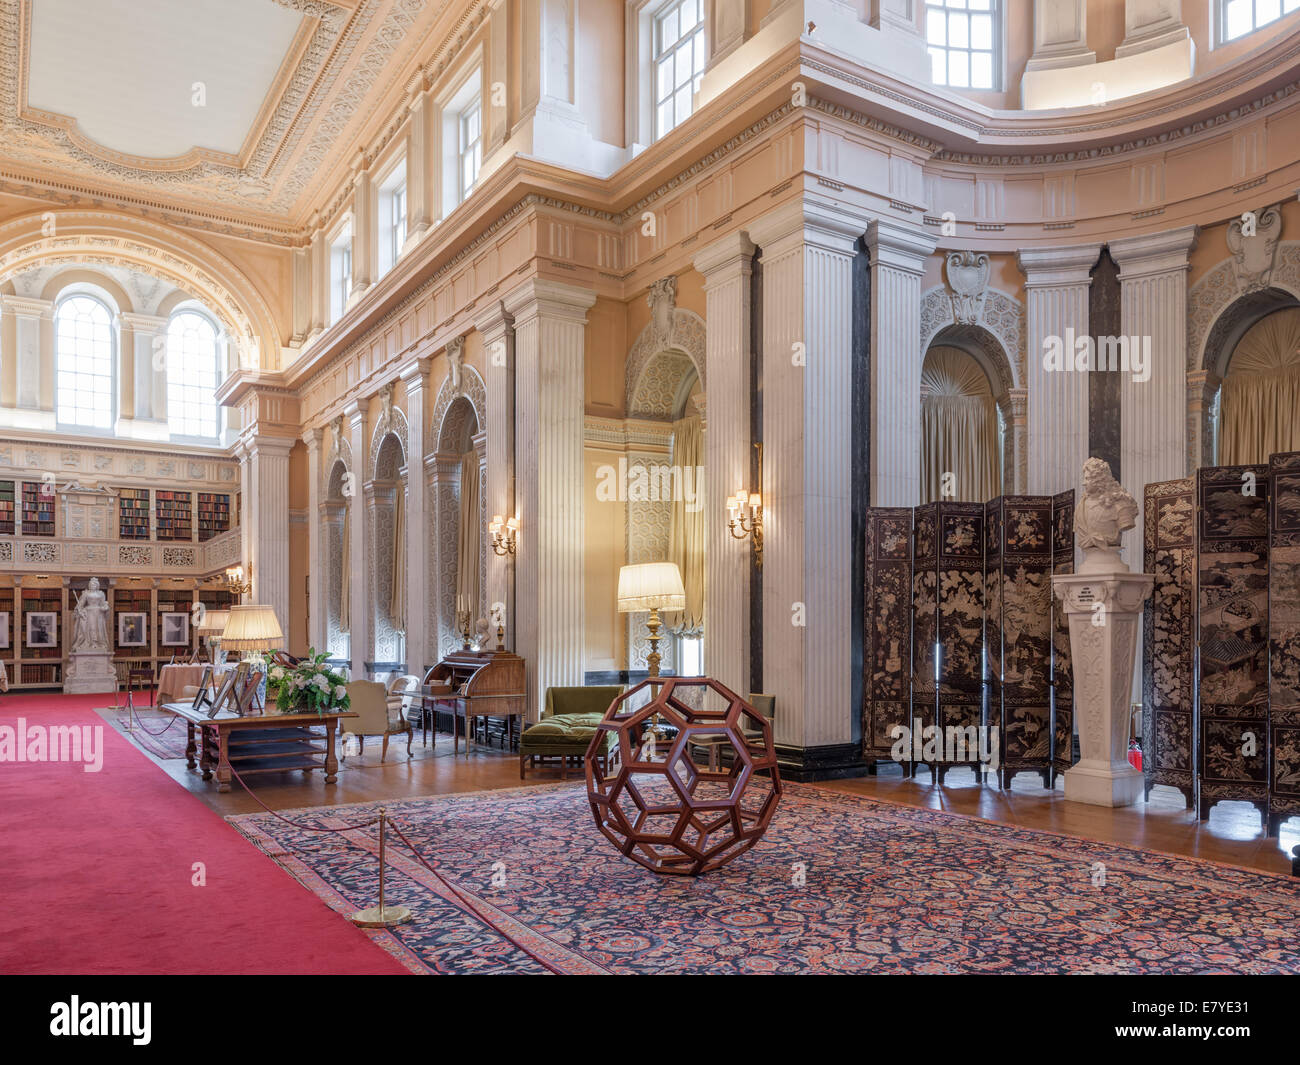 Woodstock, Oxfordshire, UK, Friday 26th September 2014 Preview of Ai Weiwei at Blenheim Palace, Blenheim Art Foundation's inaugural exhibition, opening to the public on 1st October 2014 Divina Proportione in Long Library © Nikreates/Alamy Stock Photo